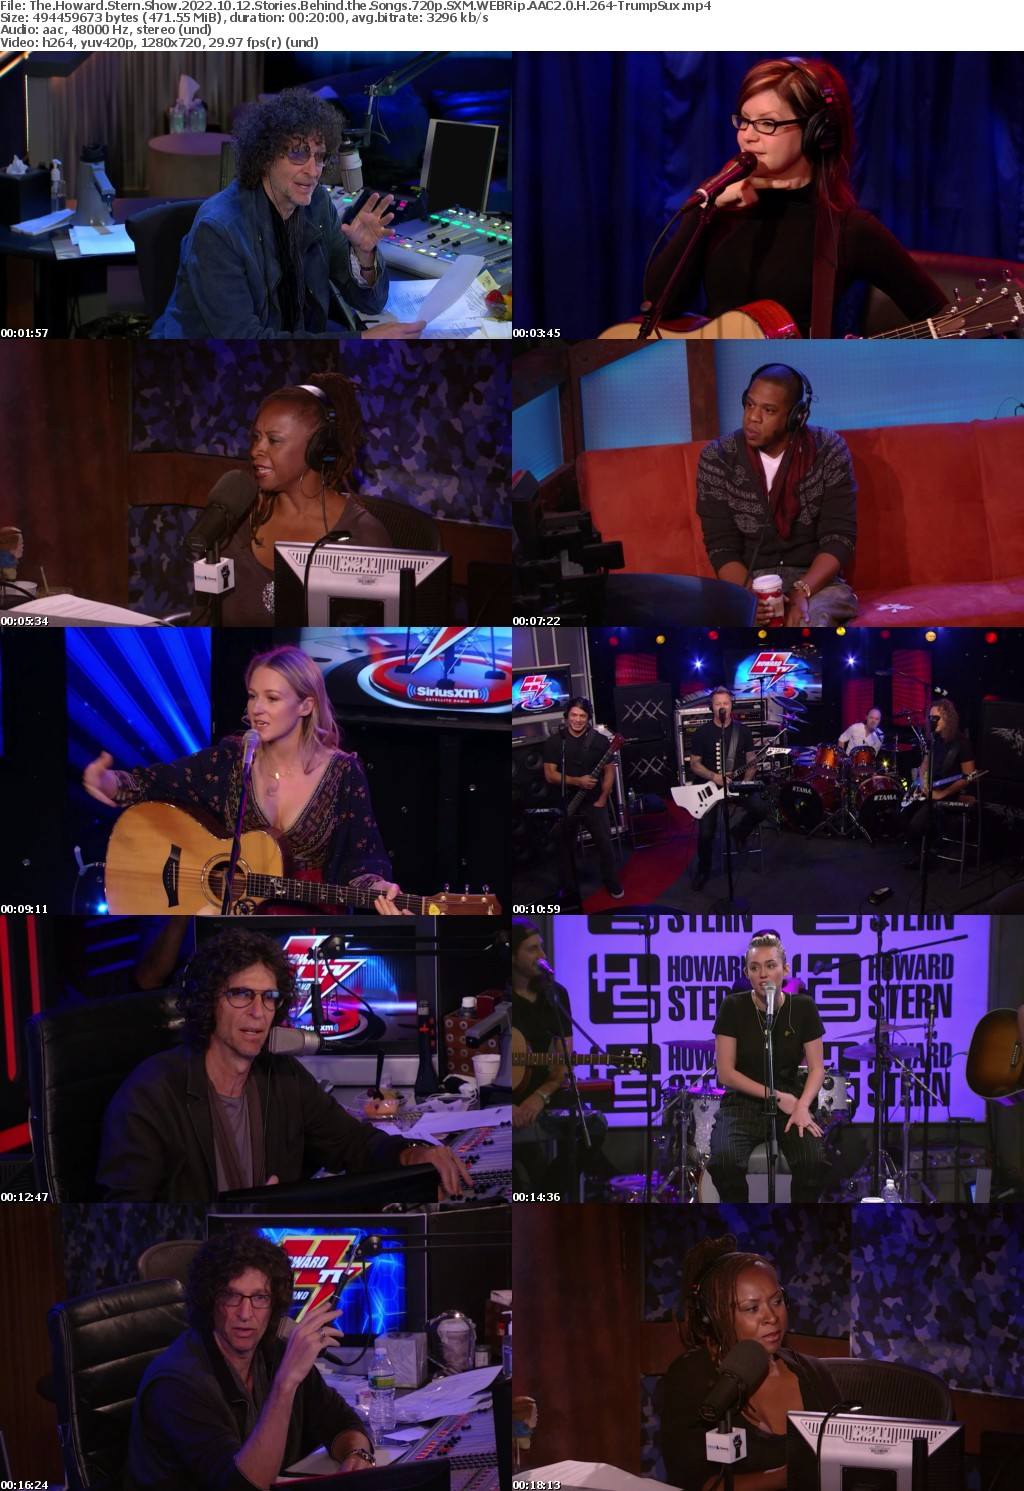 Howard Stern Show 2022 10 12 Stories Behind the Songs 720p Dbaum2